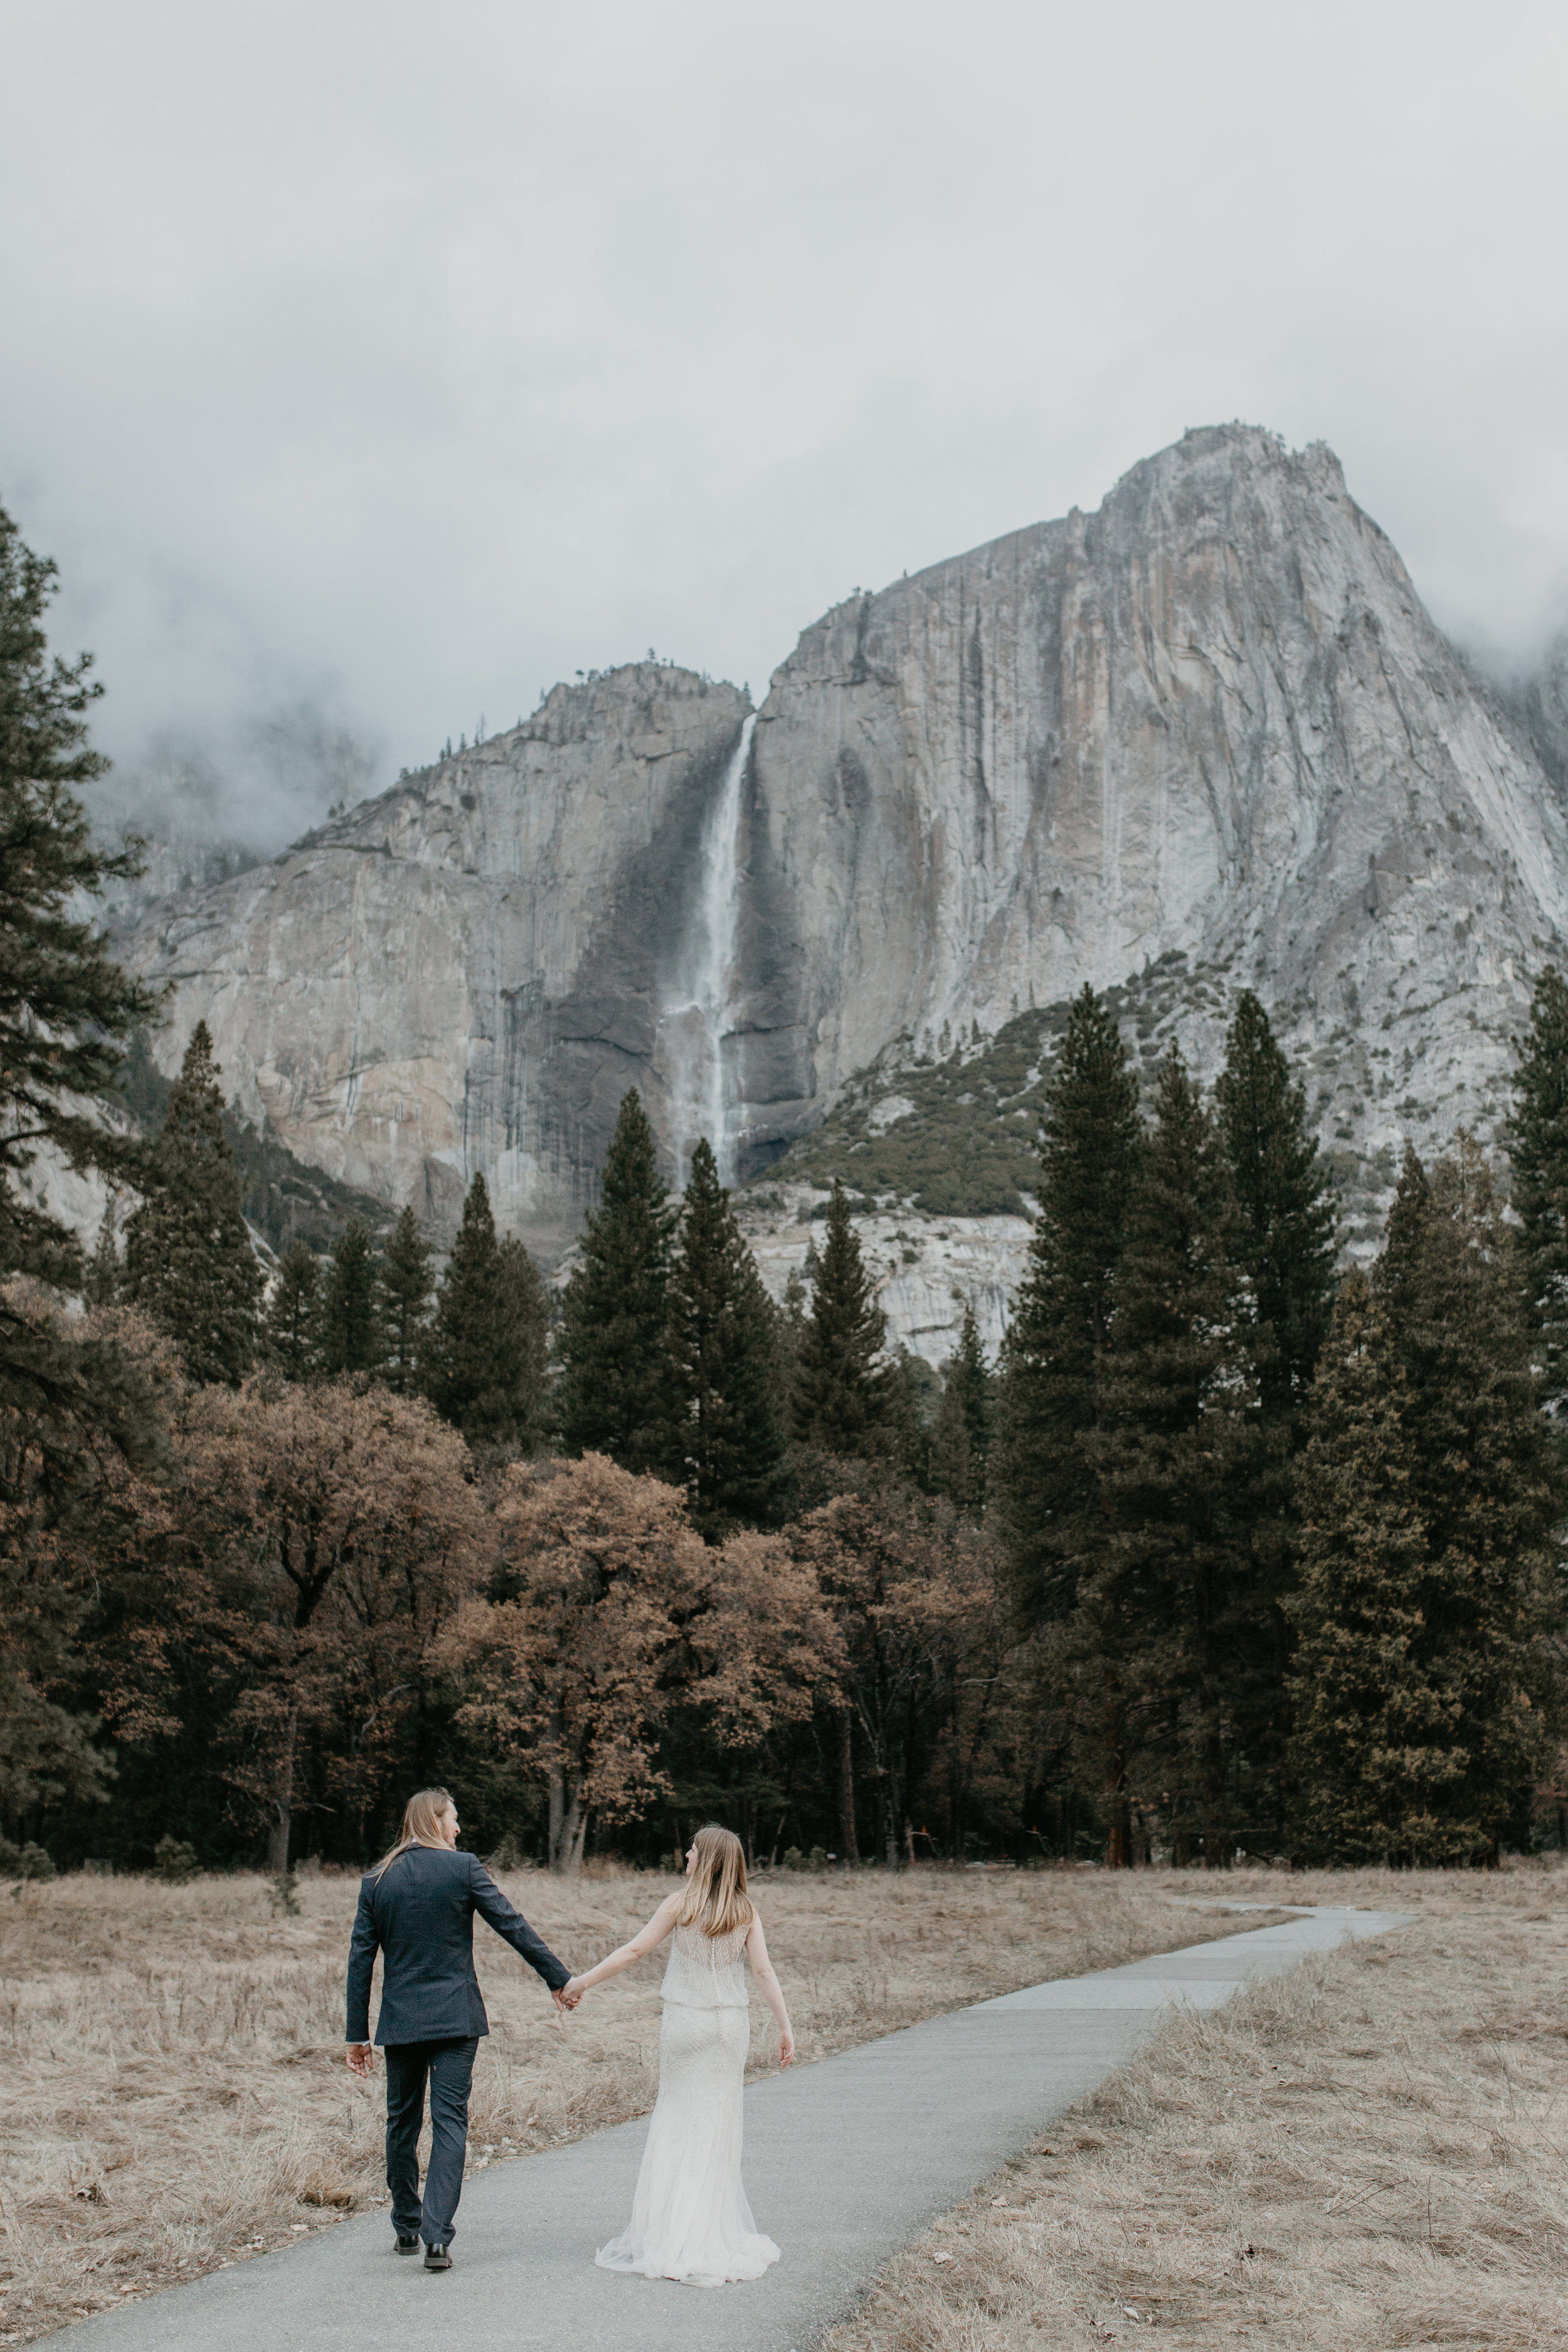 nicole-daacke-photography-yousemite-national-park-elopement-photographer-winter-cloud-moody-elope-inspiration-yosemite-valley-tunnel-view-winter-cloud-fog-weather-wedding-photos-20.jpg